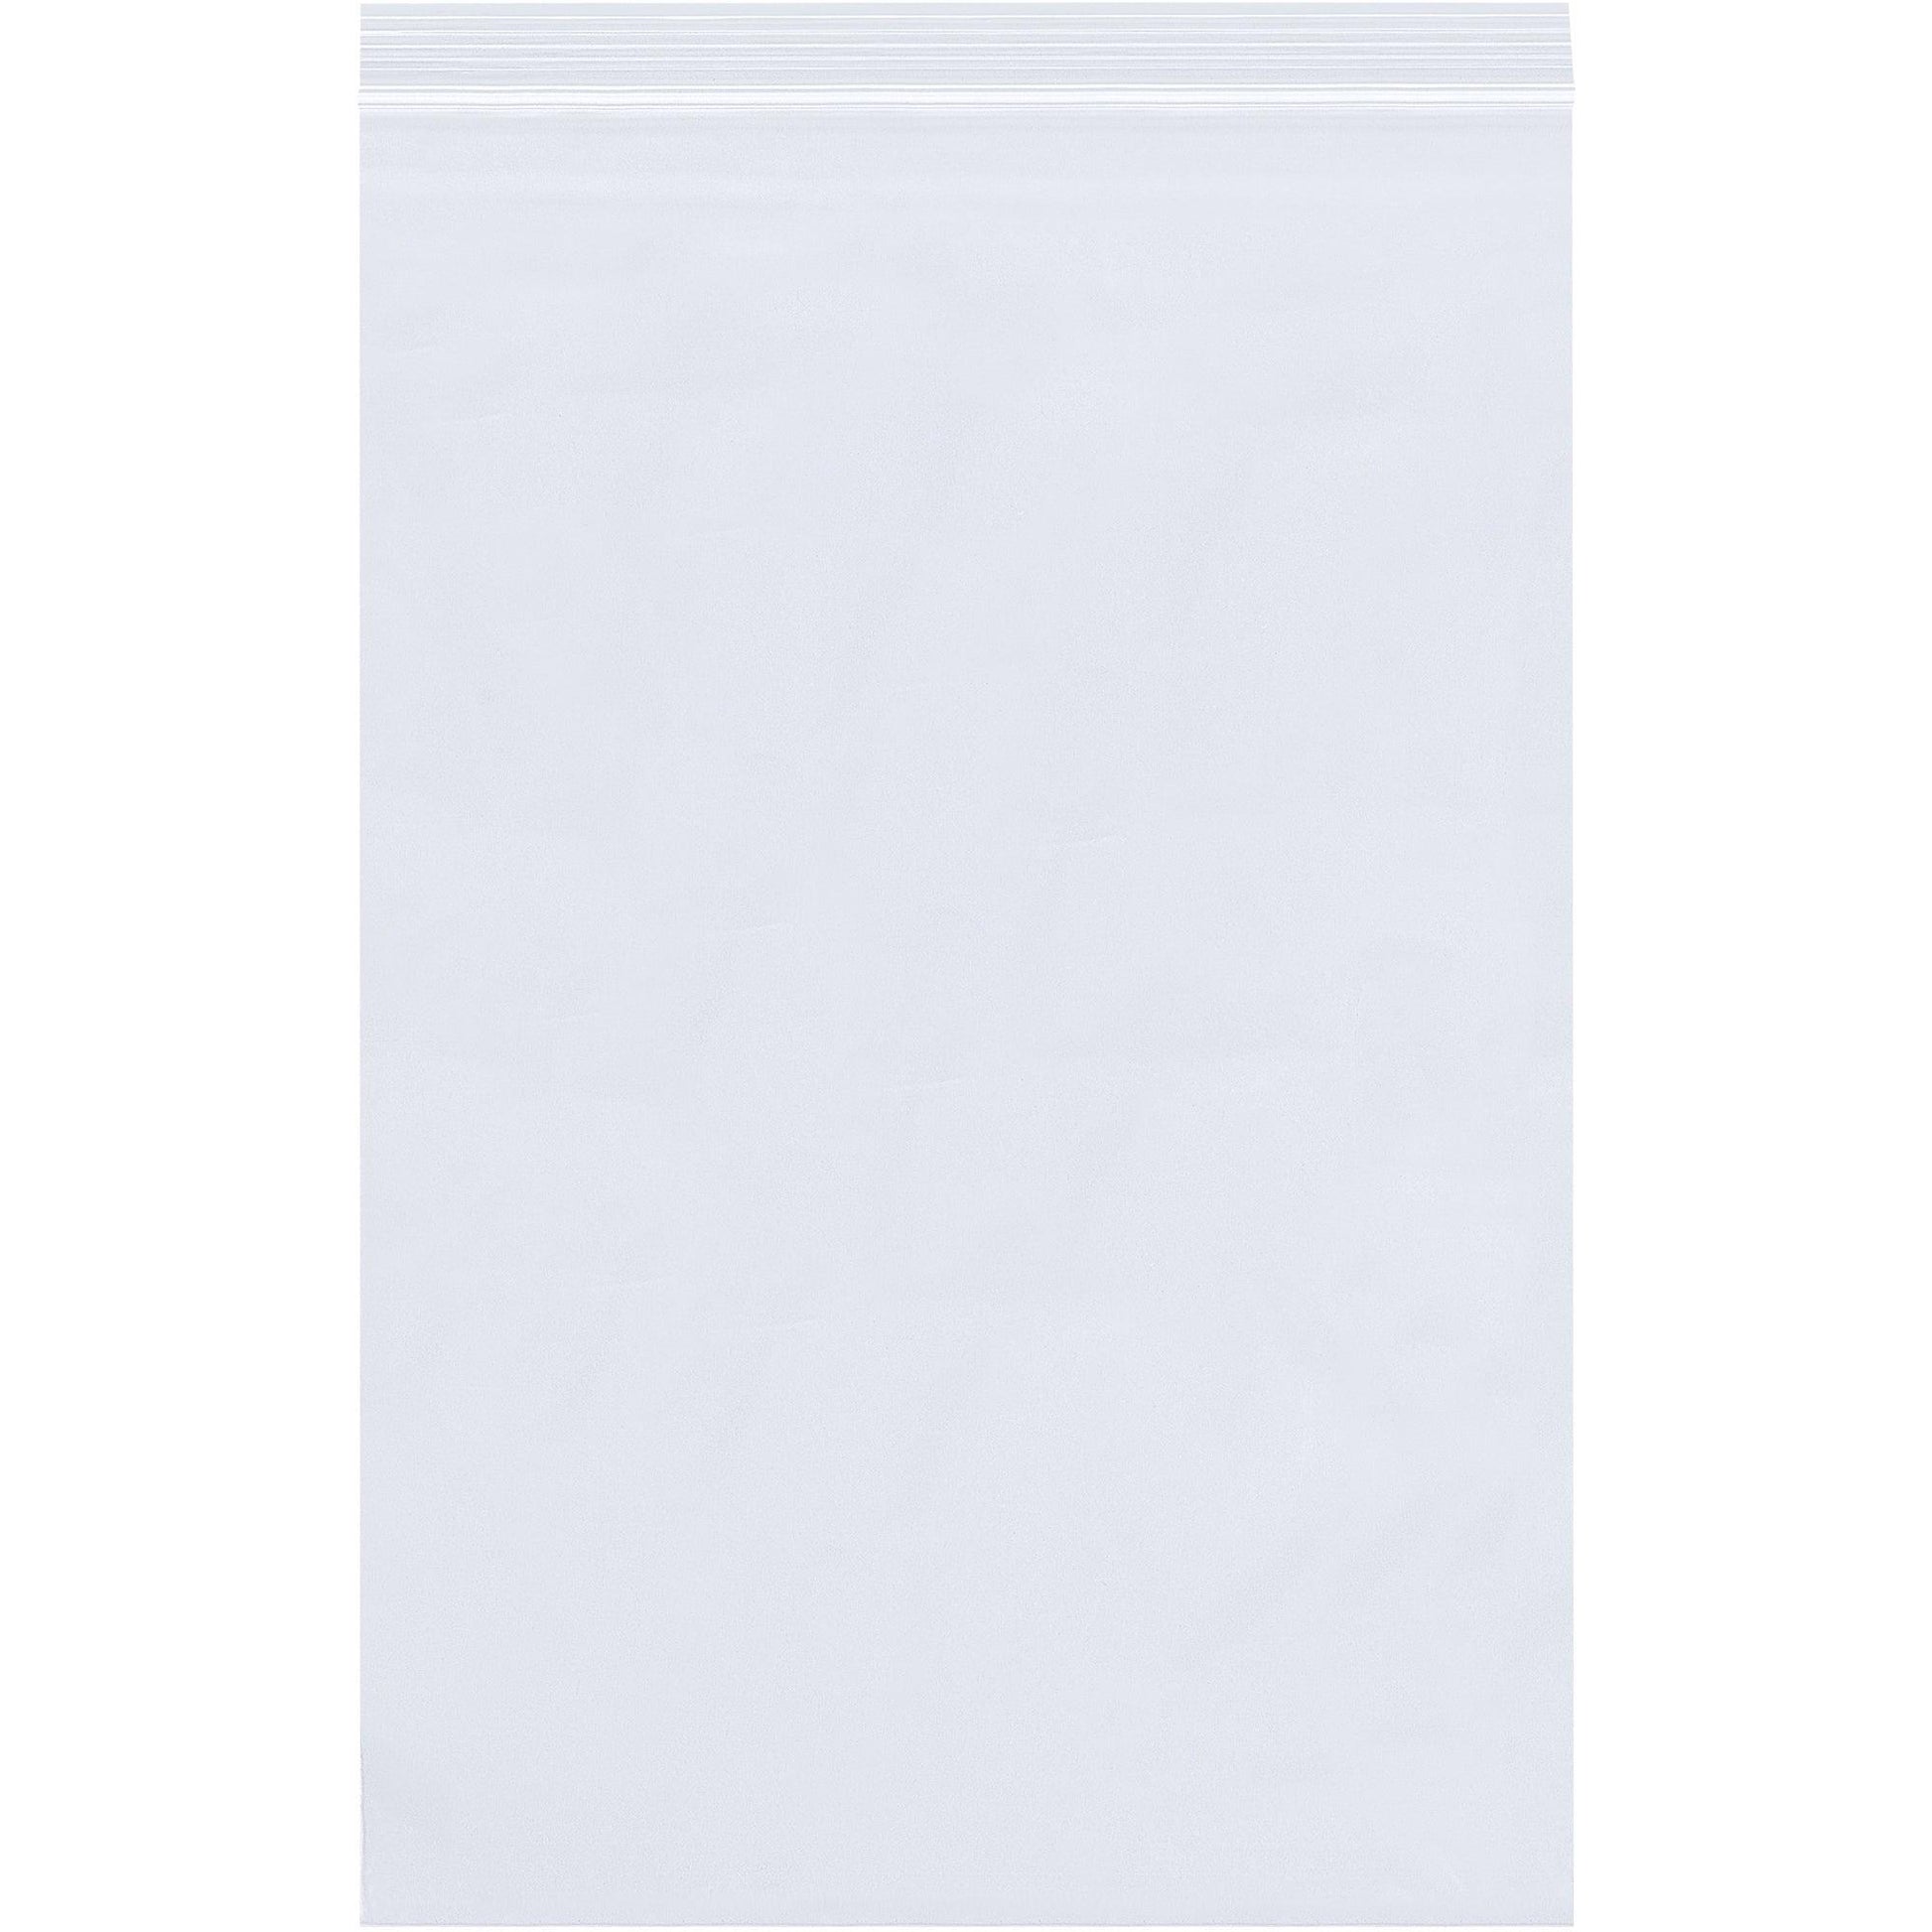 8 x 10" - 6 Mil Reclosable Poly Bags - PB3879